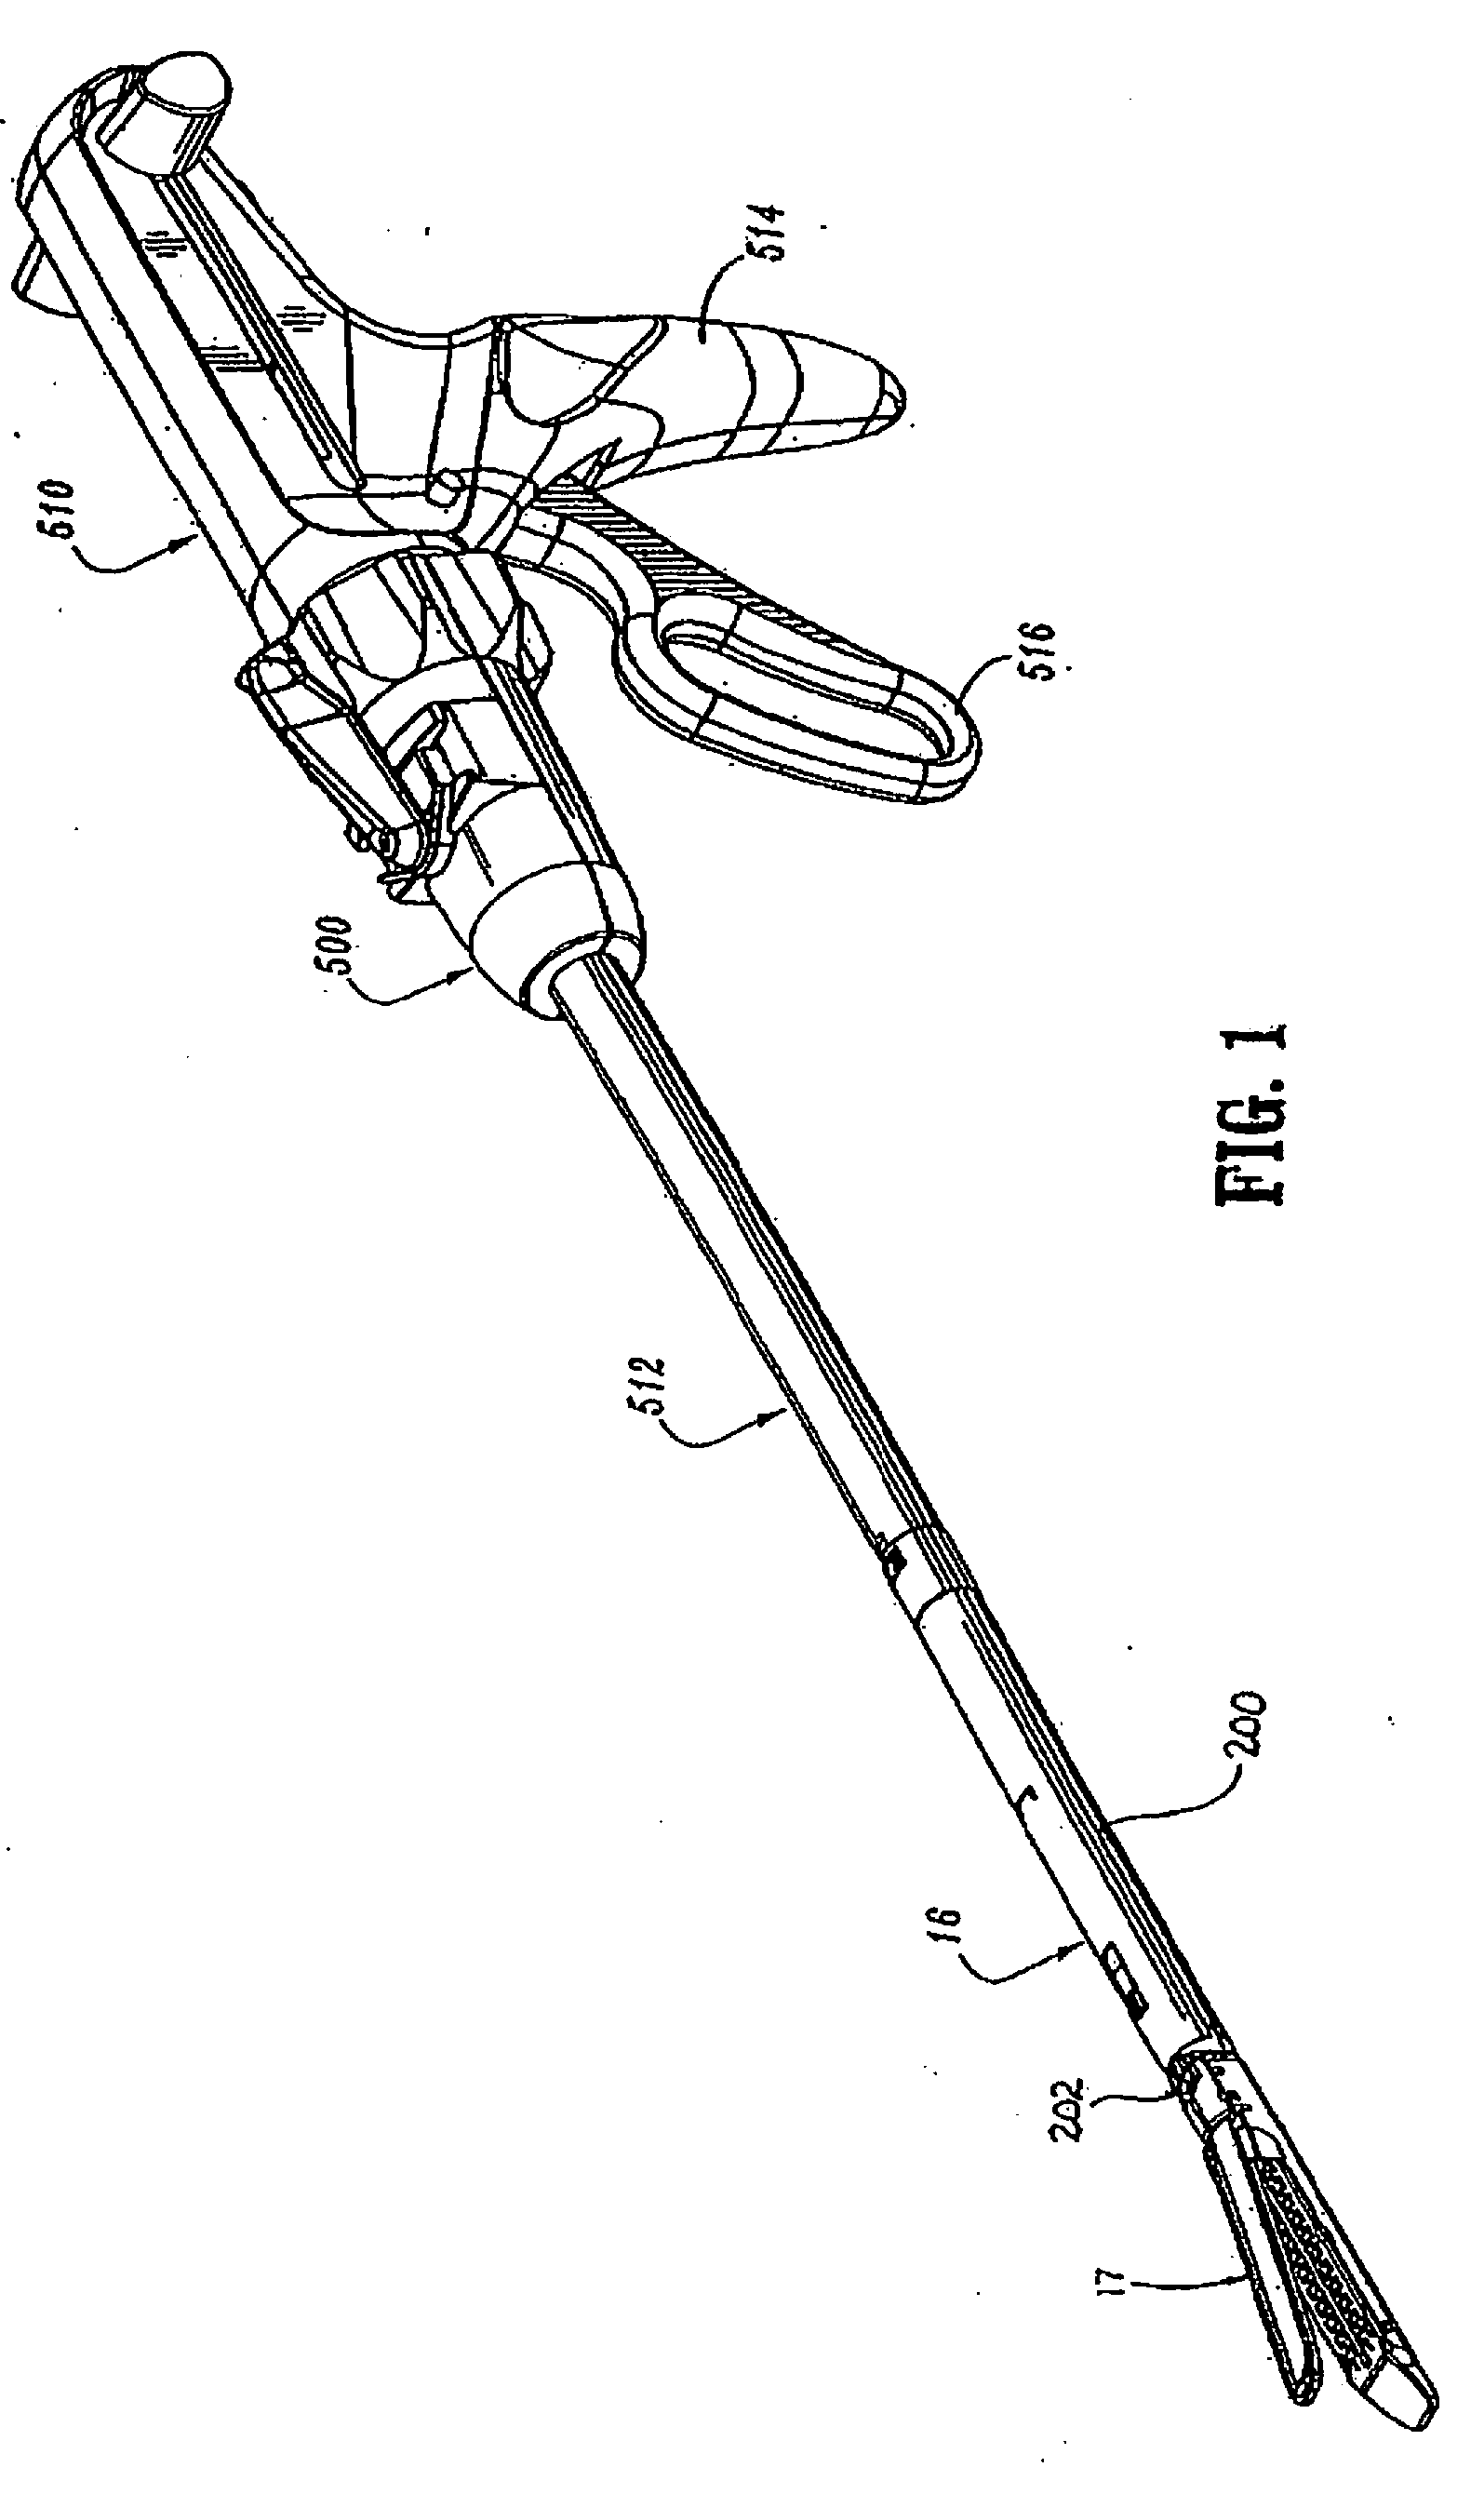 Surgical Instrument Having a Plastic Surface